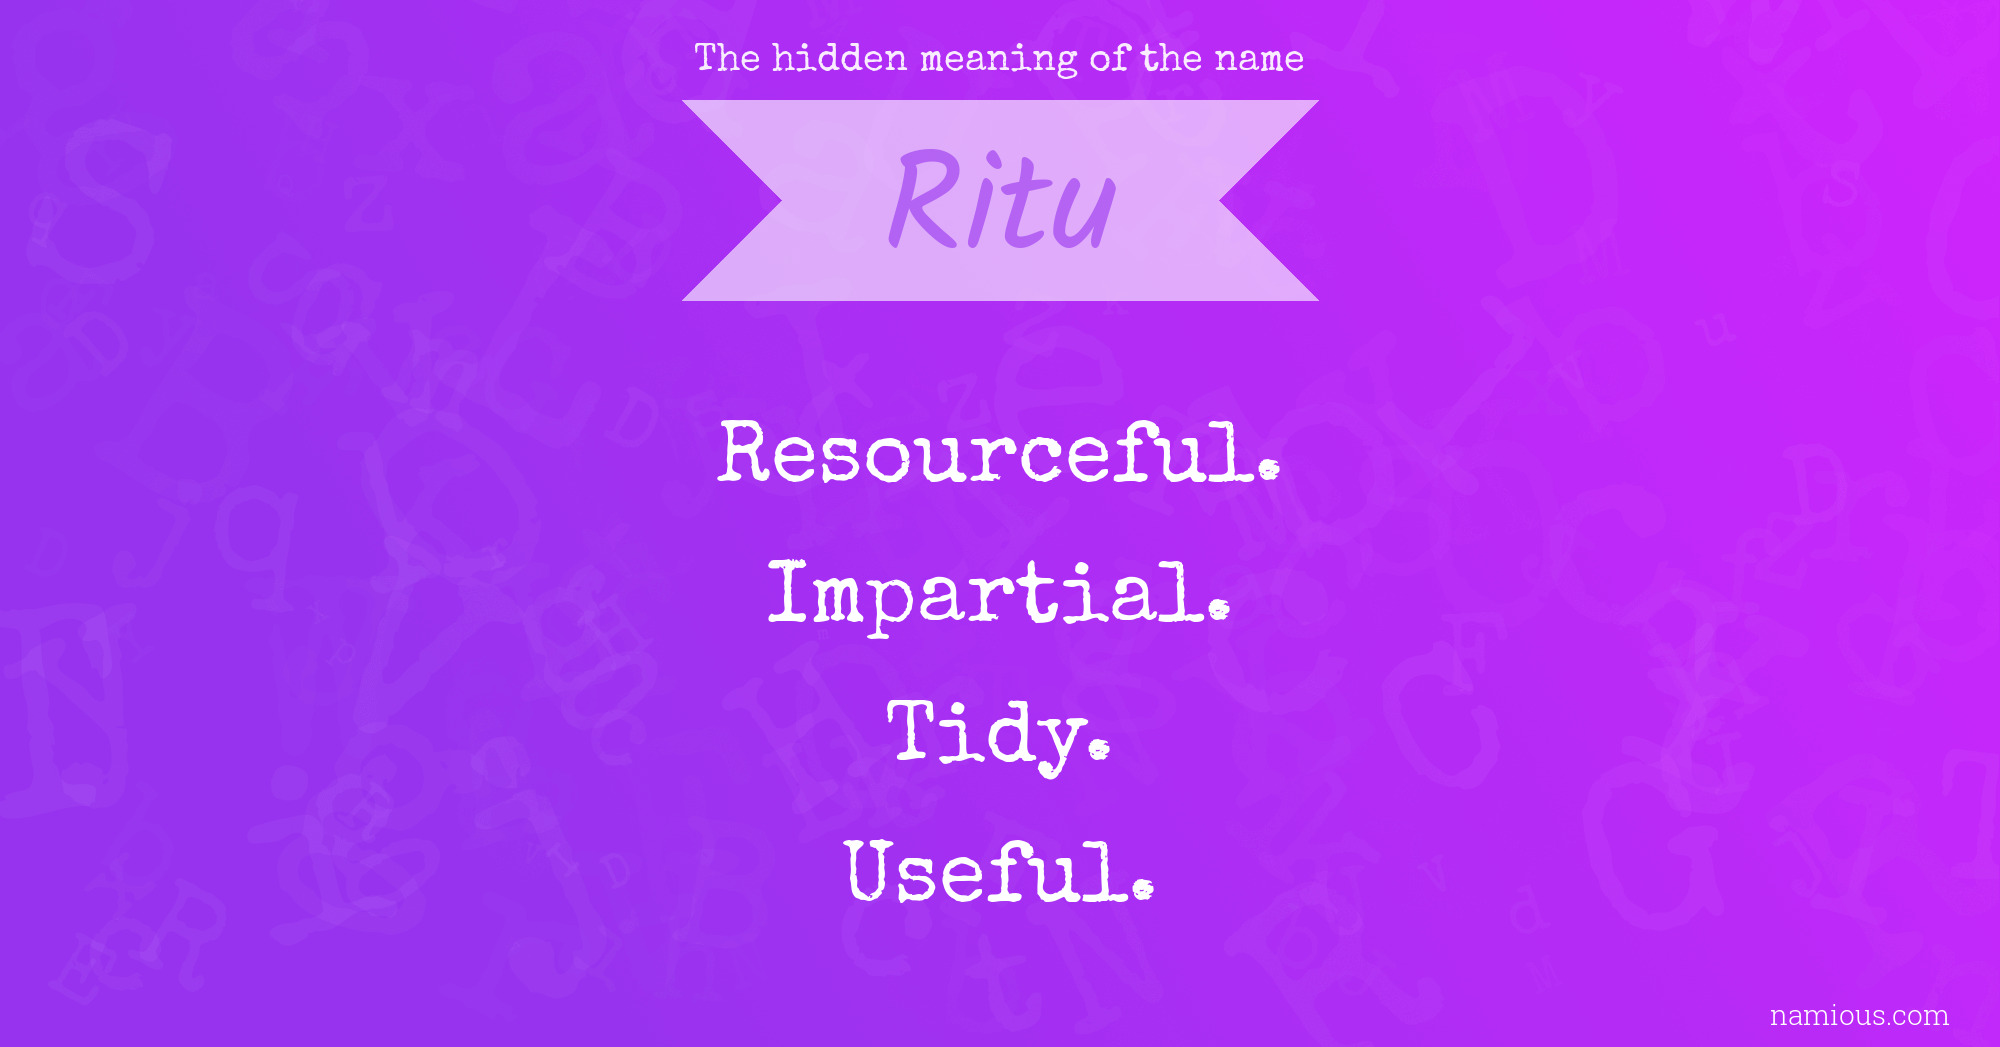 The hidden meaning of the name Ritu